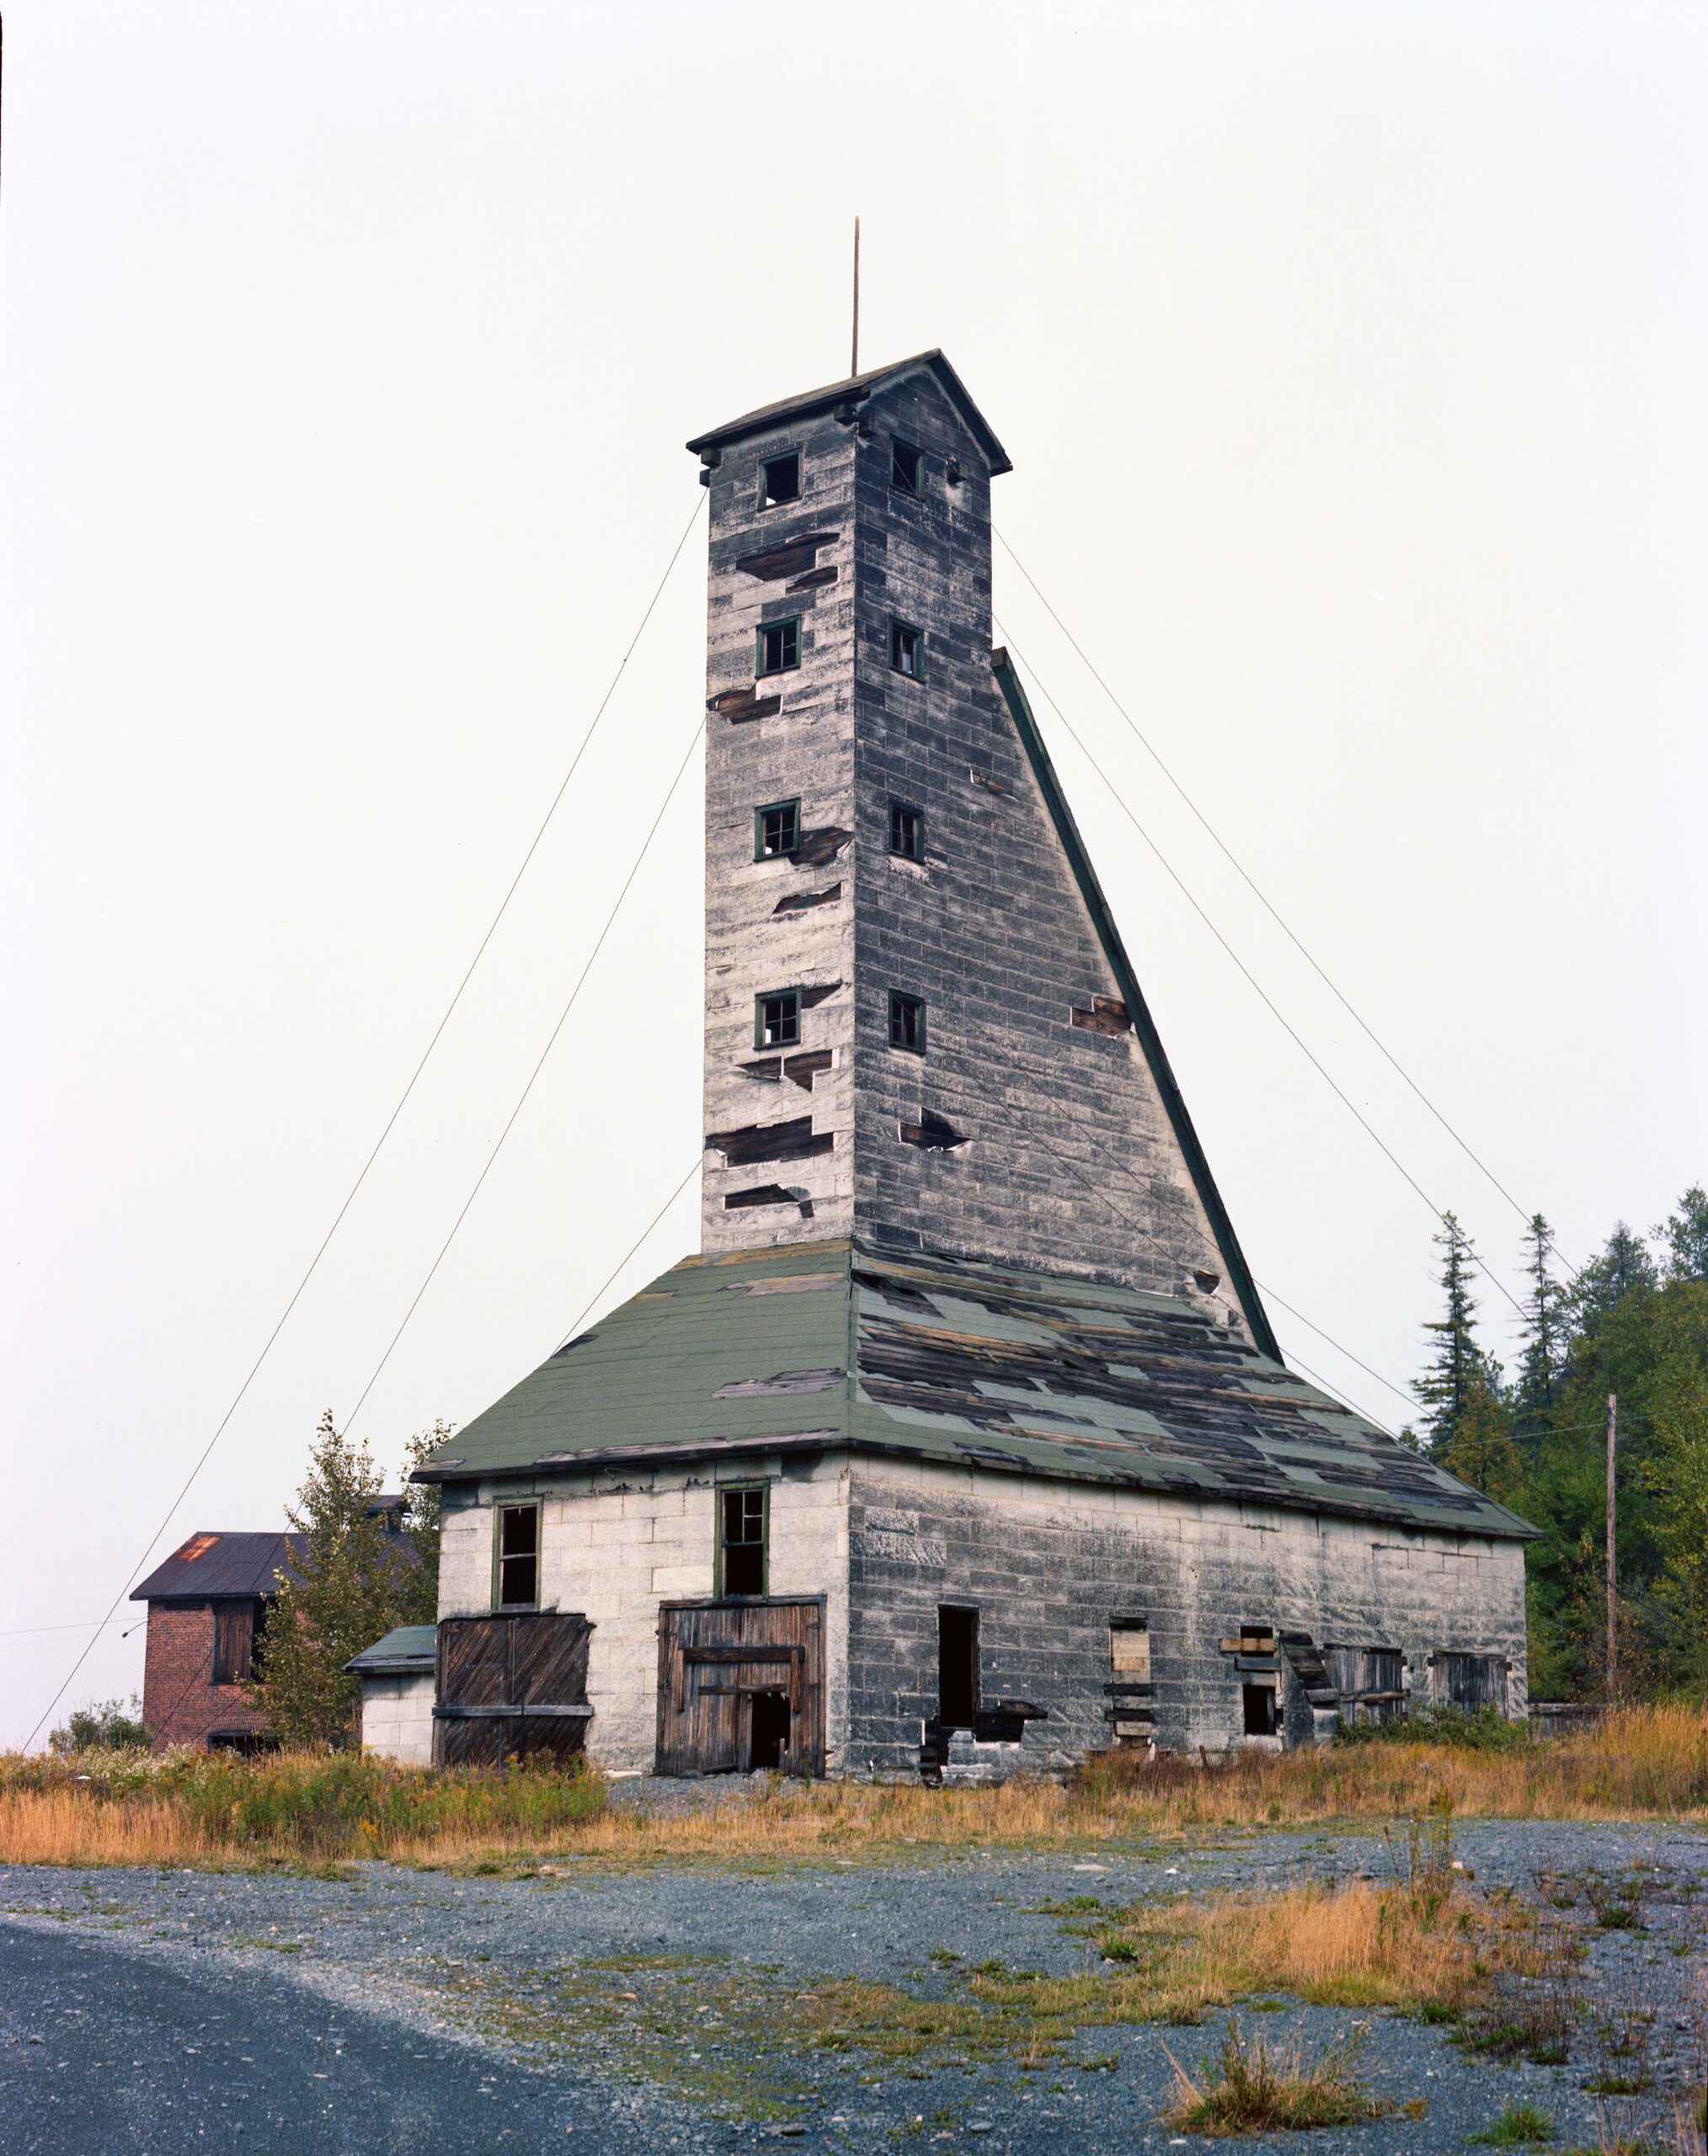 the Colonial Mine headframe; a tall white and green headframe building, severely weathered and with boarded windows, surrounded in dry autumn grass and brush.